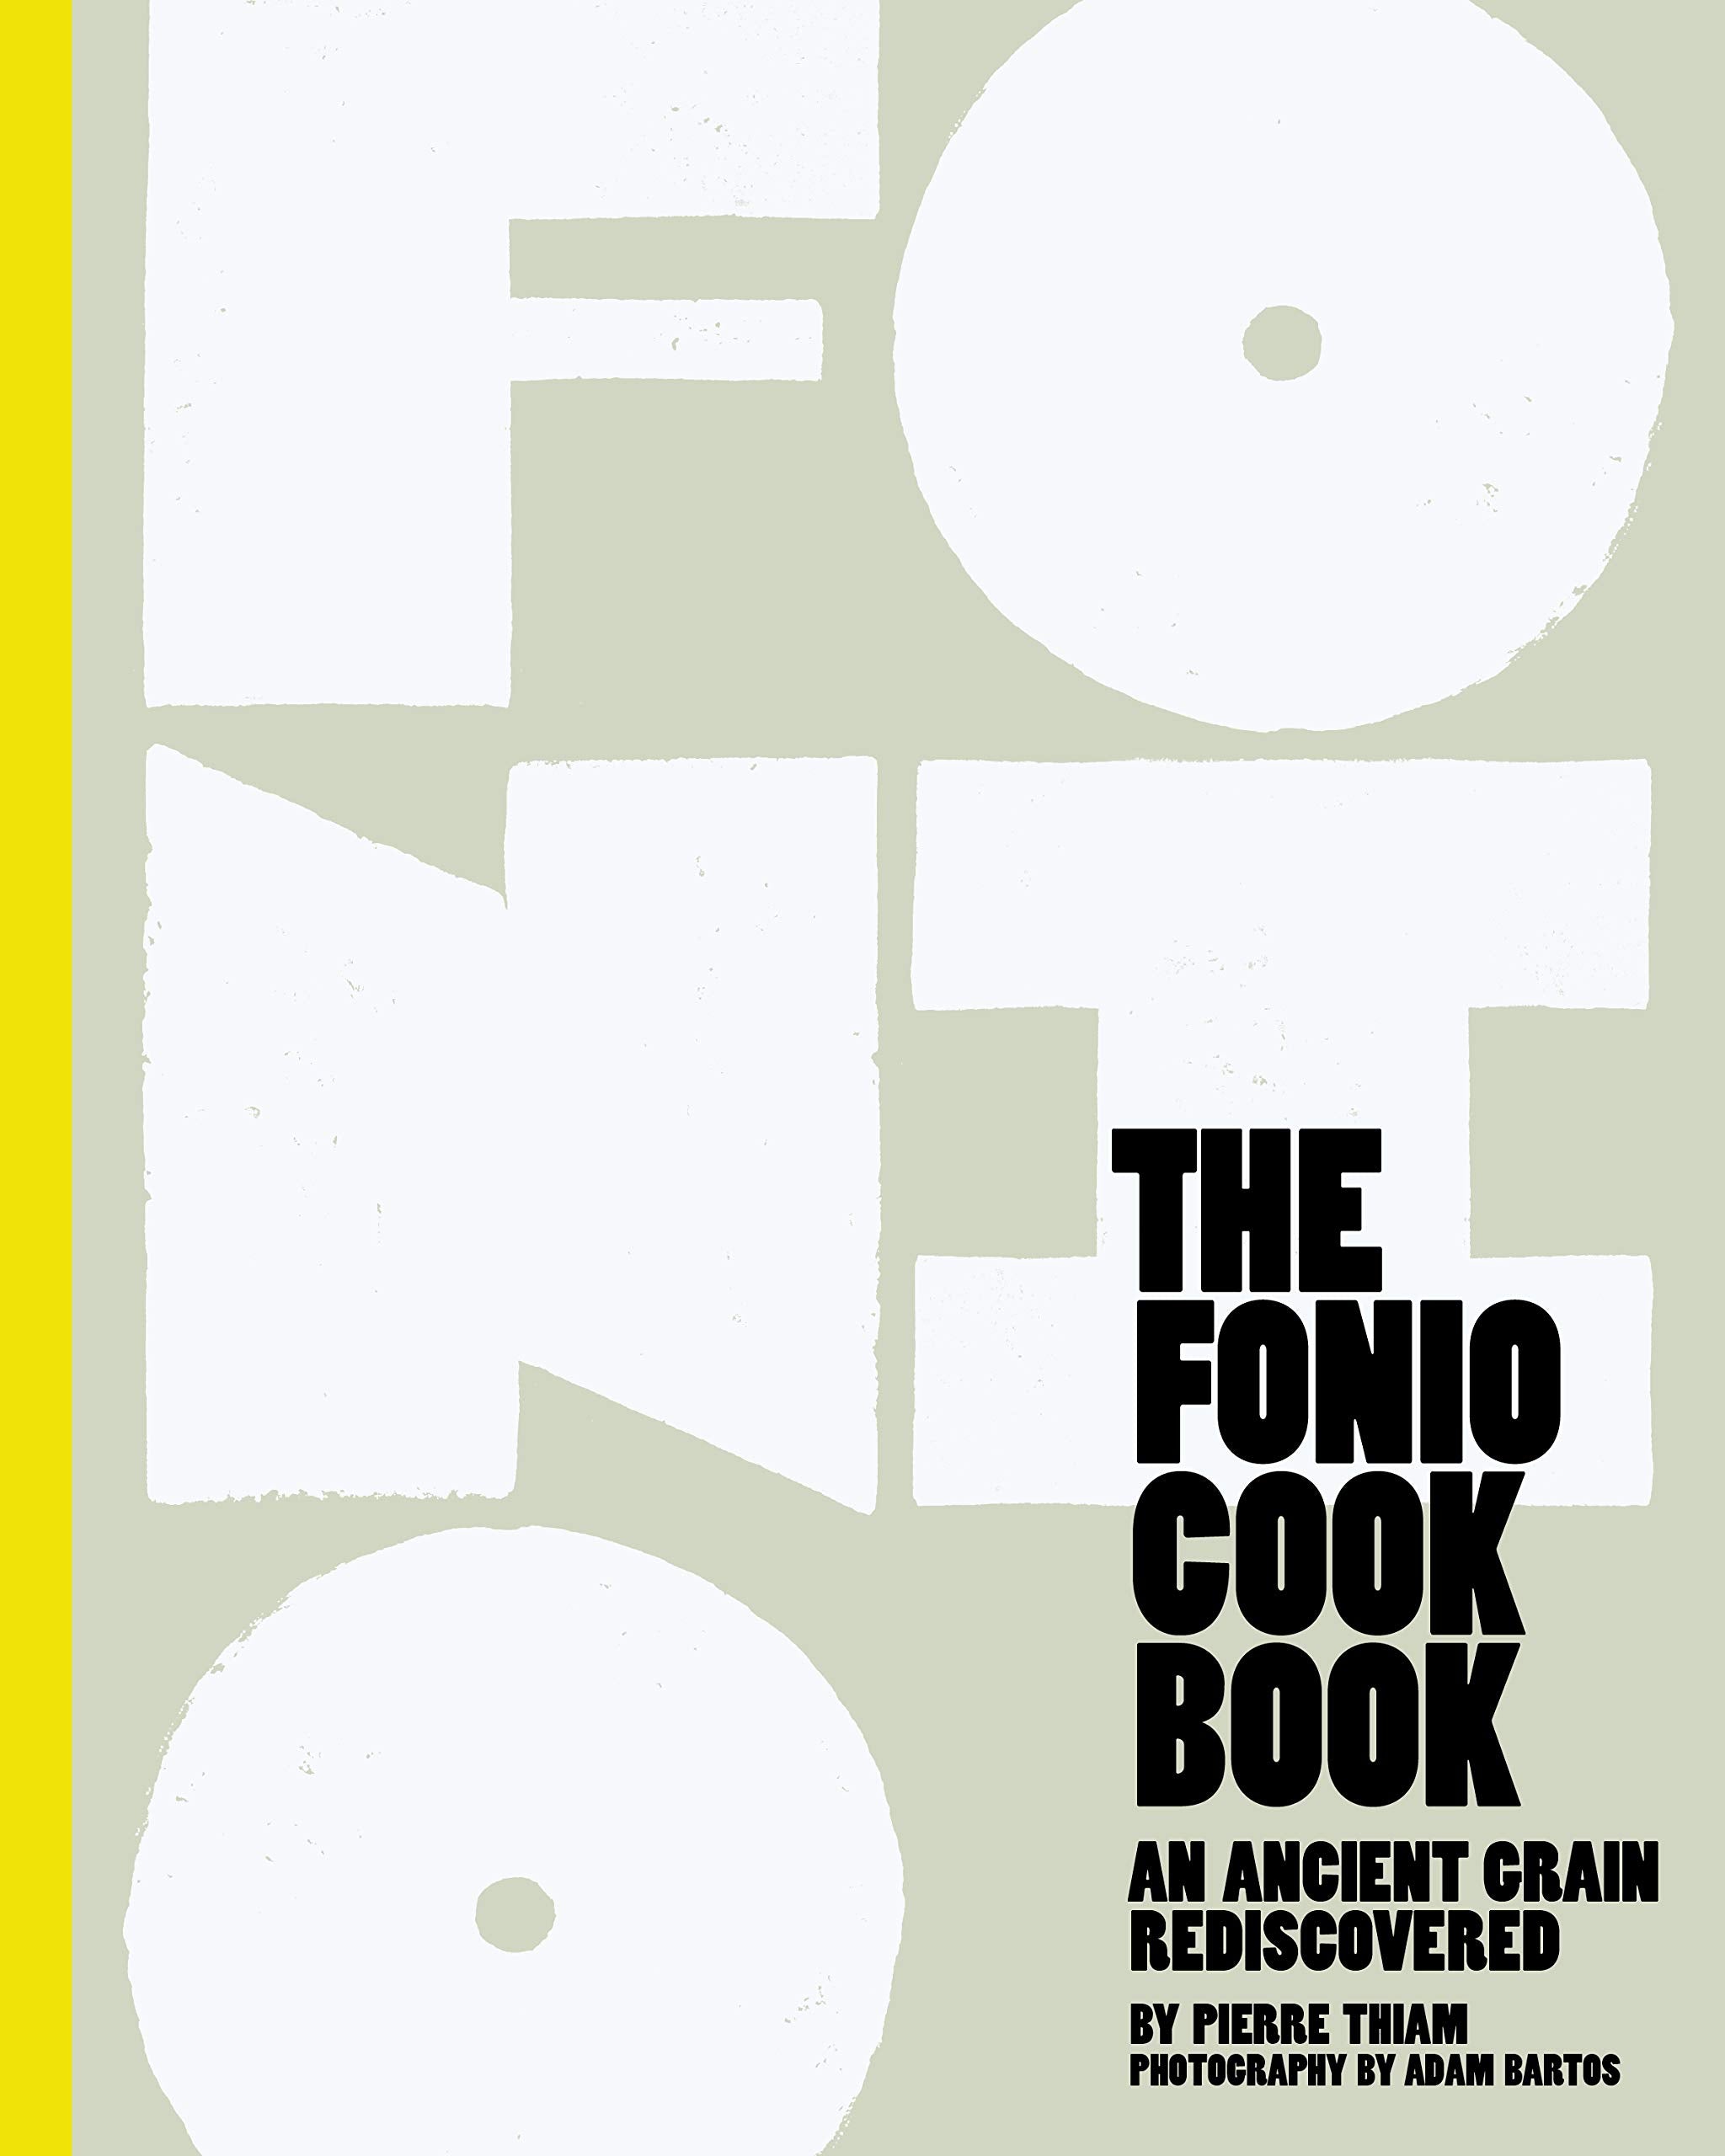 The Fonio Cookbook: An Ancient Grain Rediscovered (Pierre Thiam)